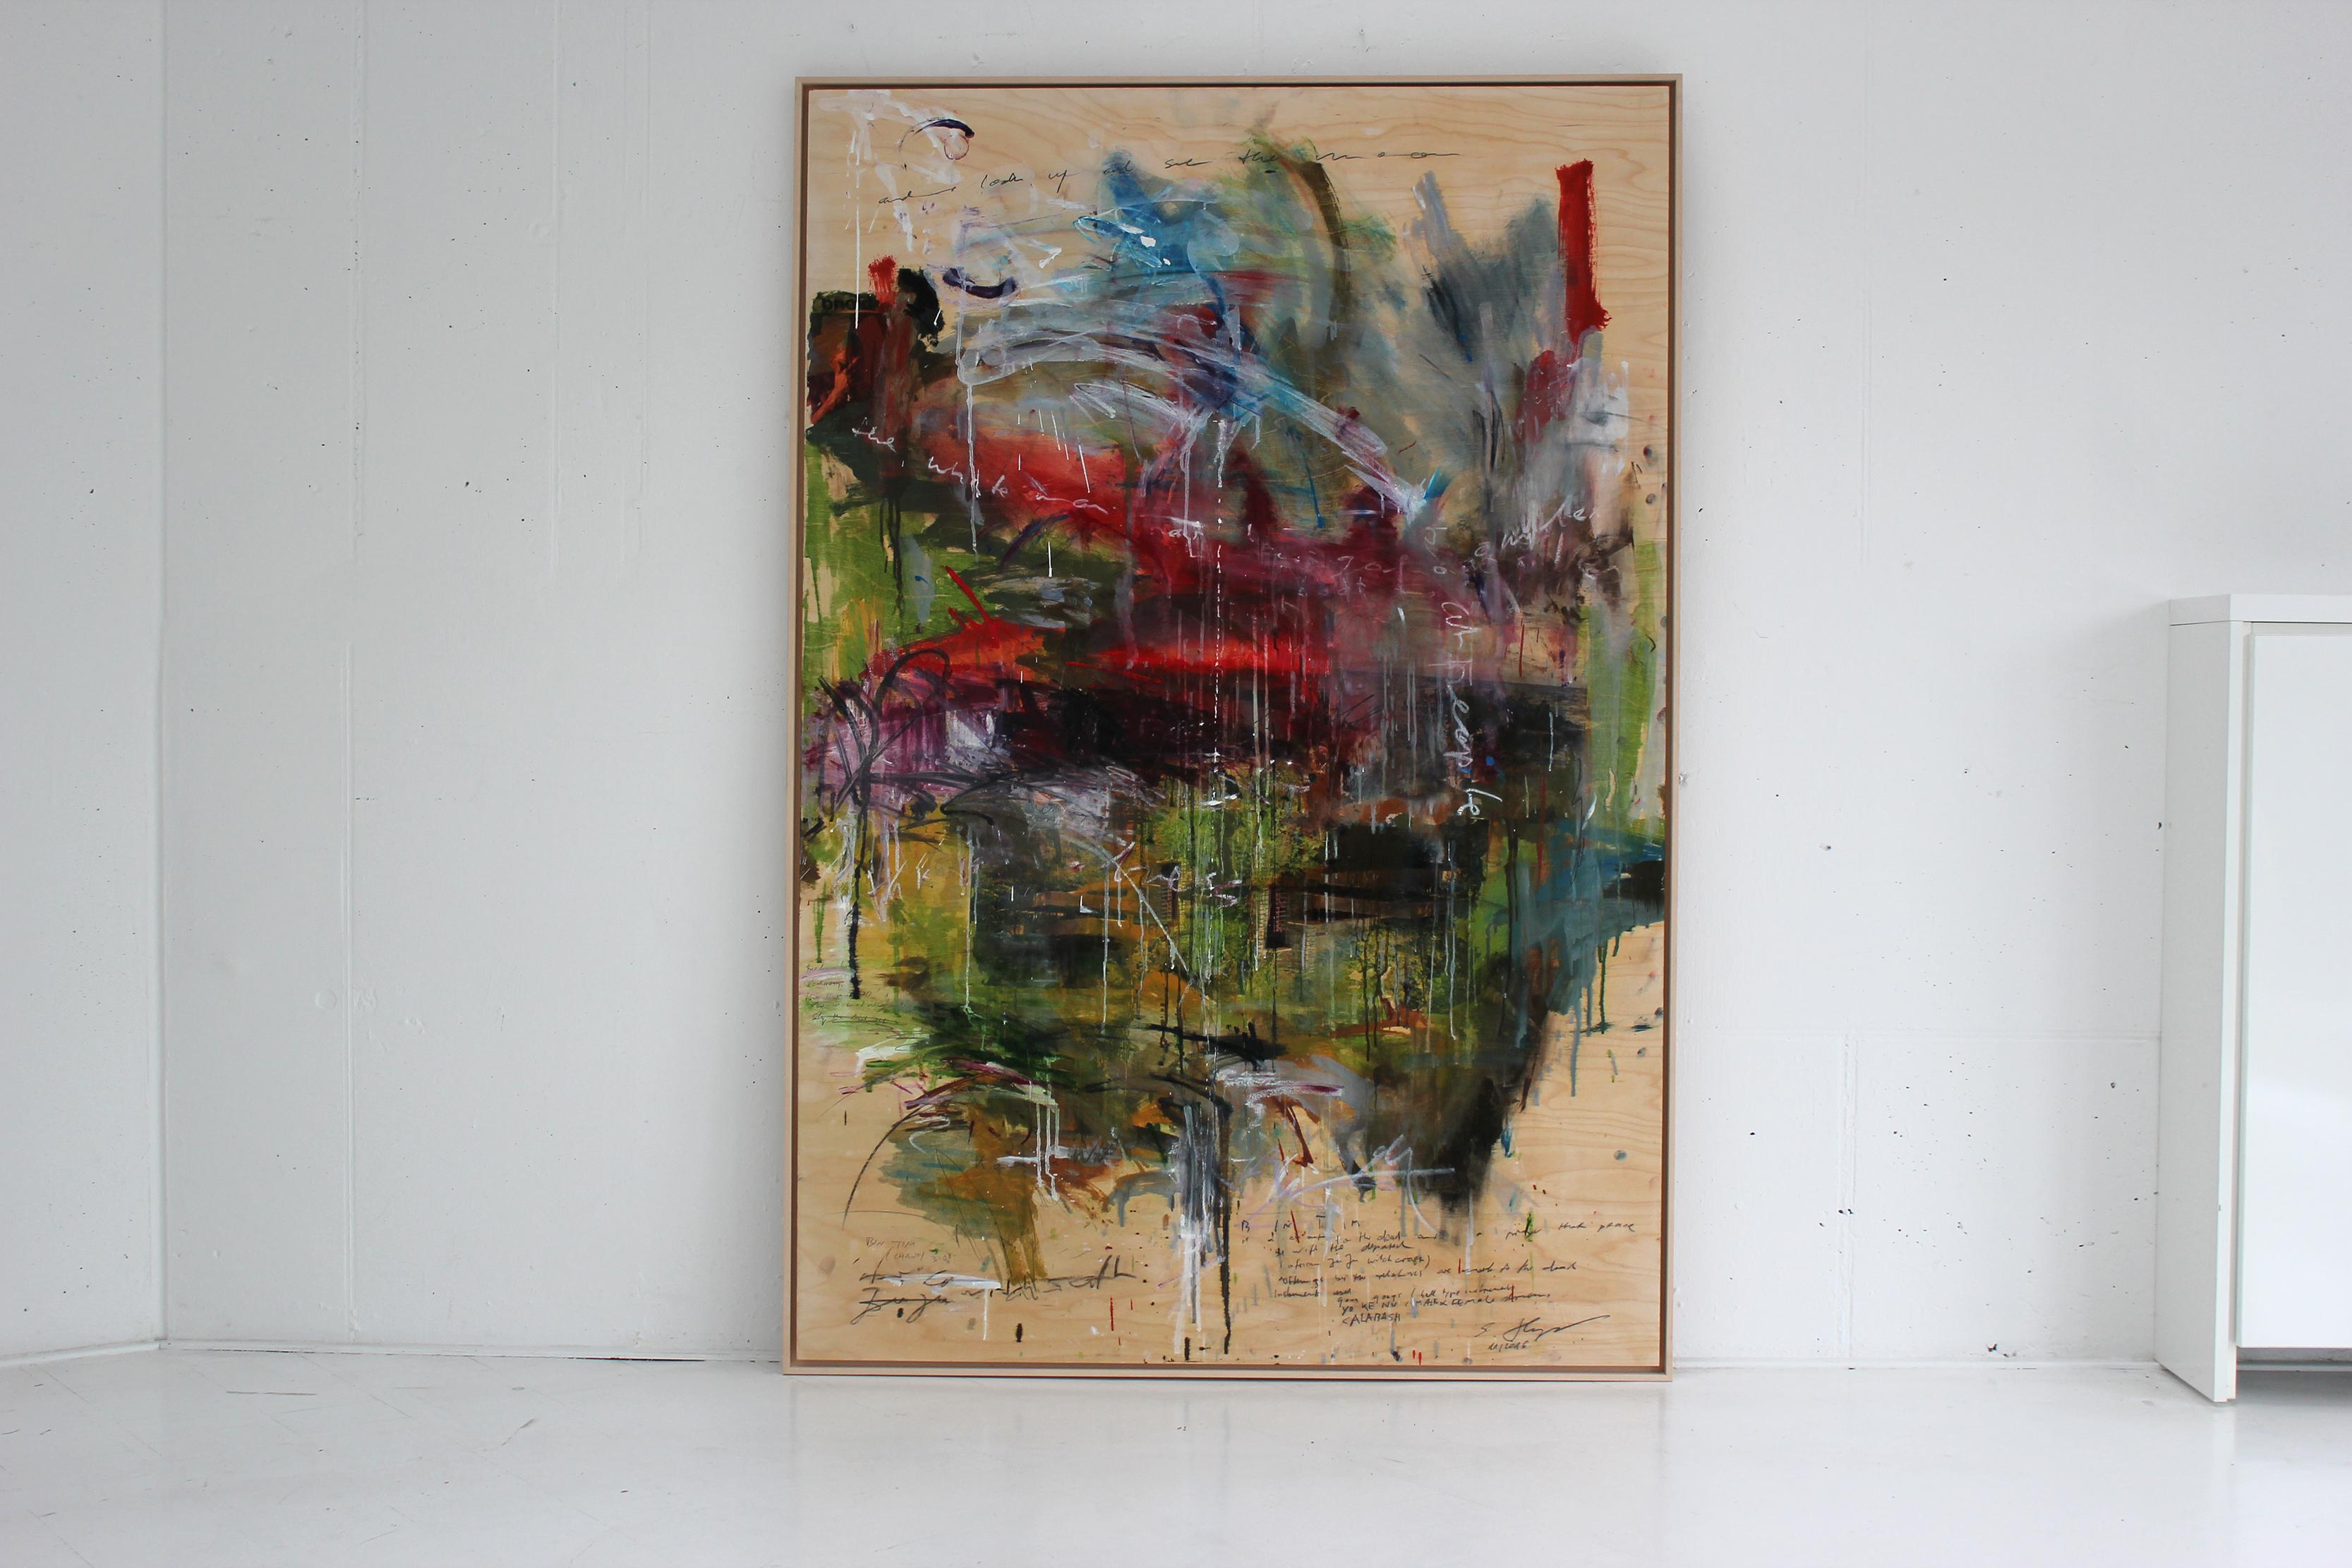 'Falling Water' abstract collage of a landscape by Stefan Heyer.
Mixed-media on wood: oil, photo-transfer, oil stick, crayon, pencil on wood

'Falling Water' is a special piece by the artist. Negative space takes a big share of the entire collage